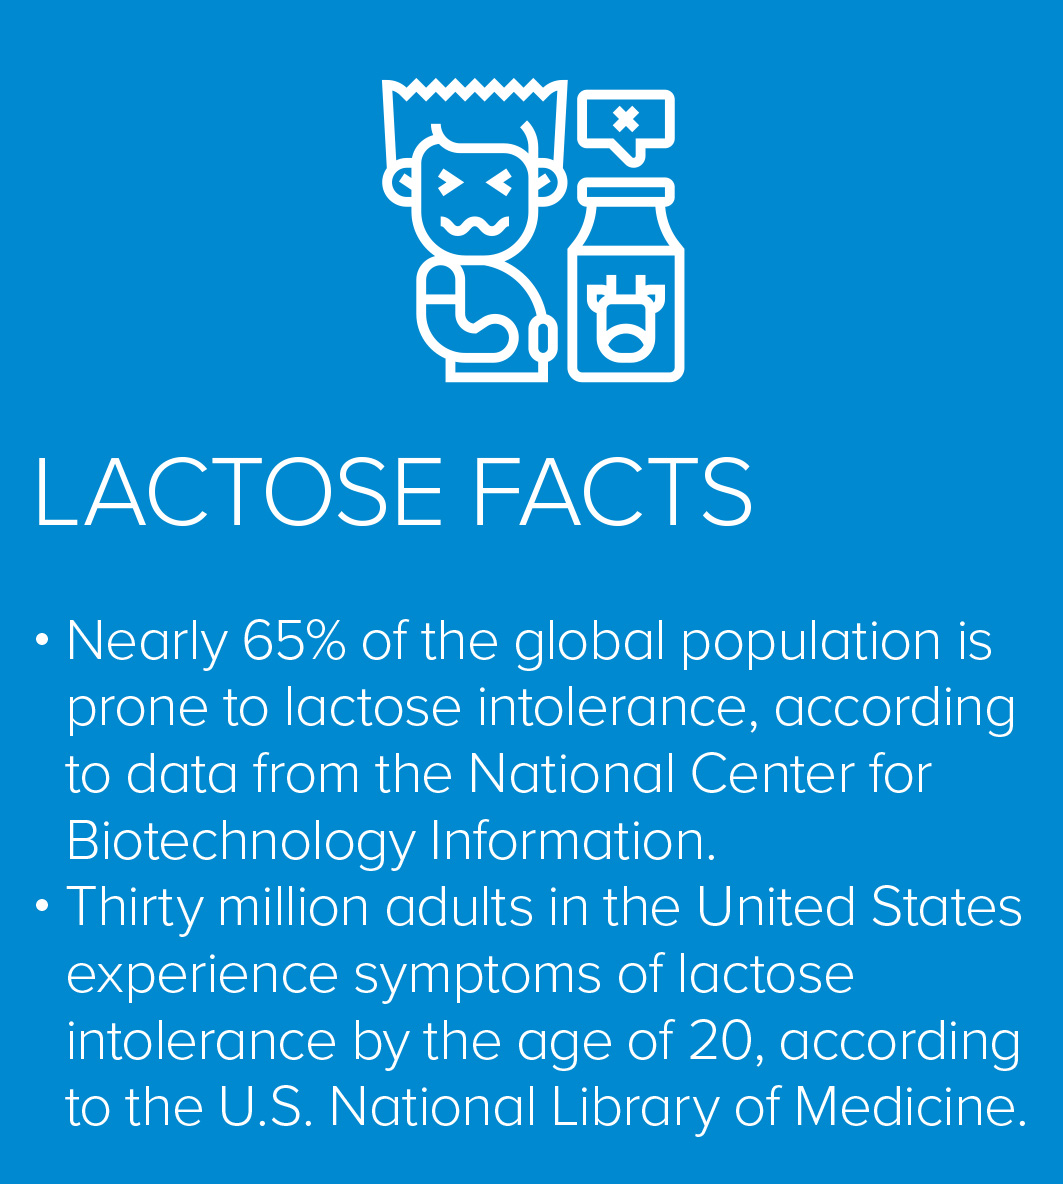 Lactose Facts